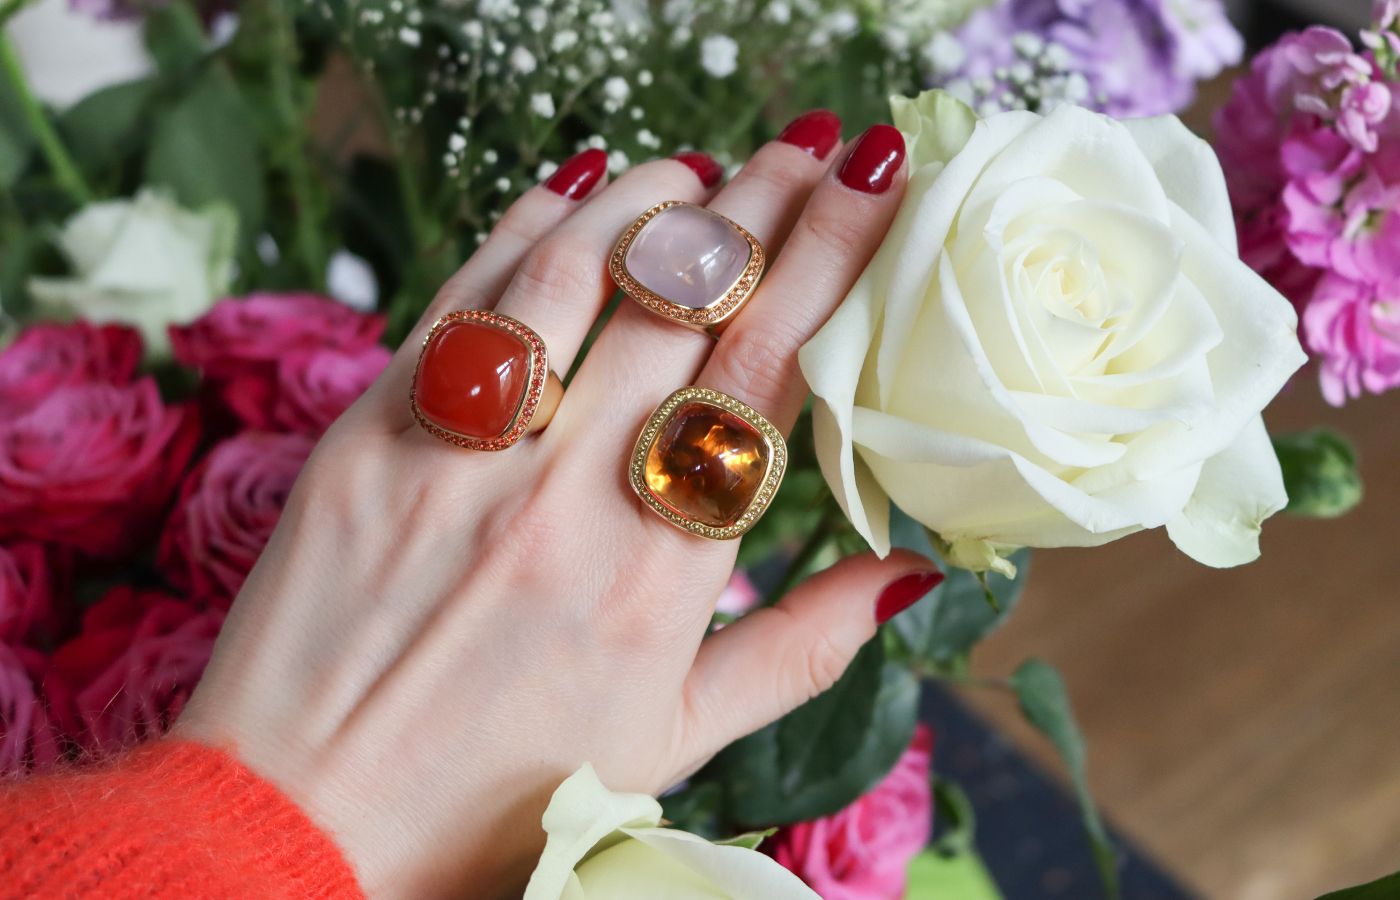 Katerina Perez models a trio of Magic Wish cocktail rings by Charlotte Reedtz Jewellery